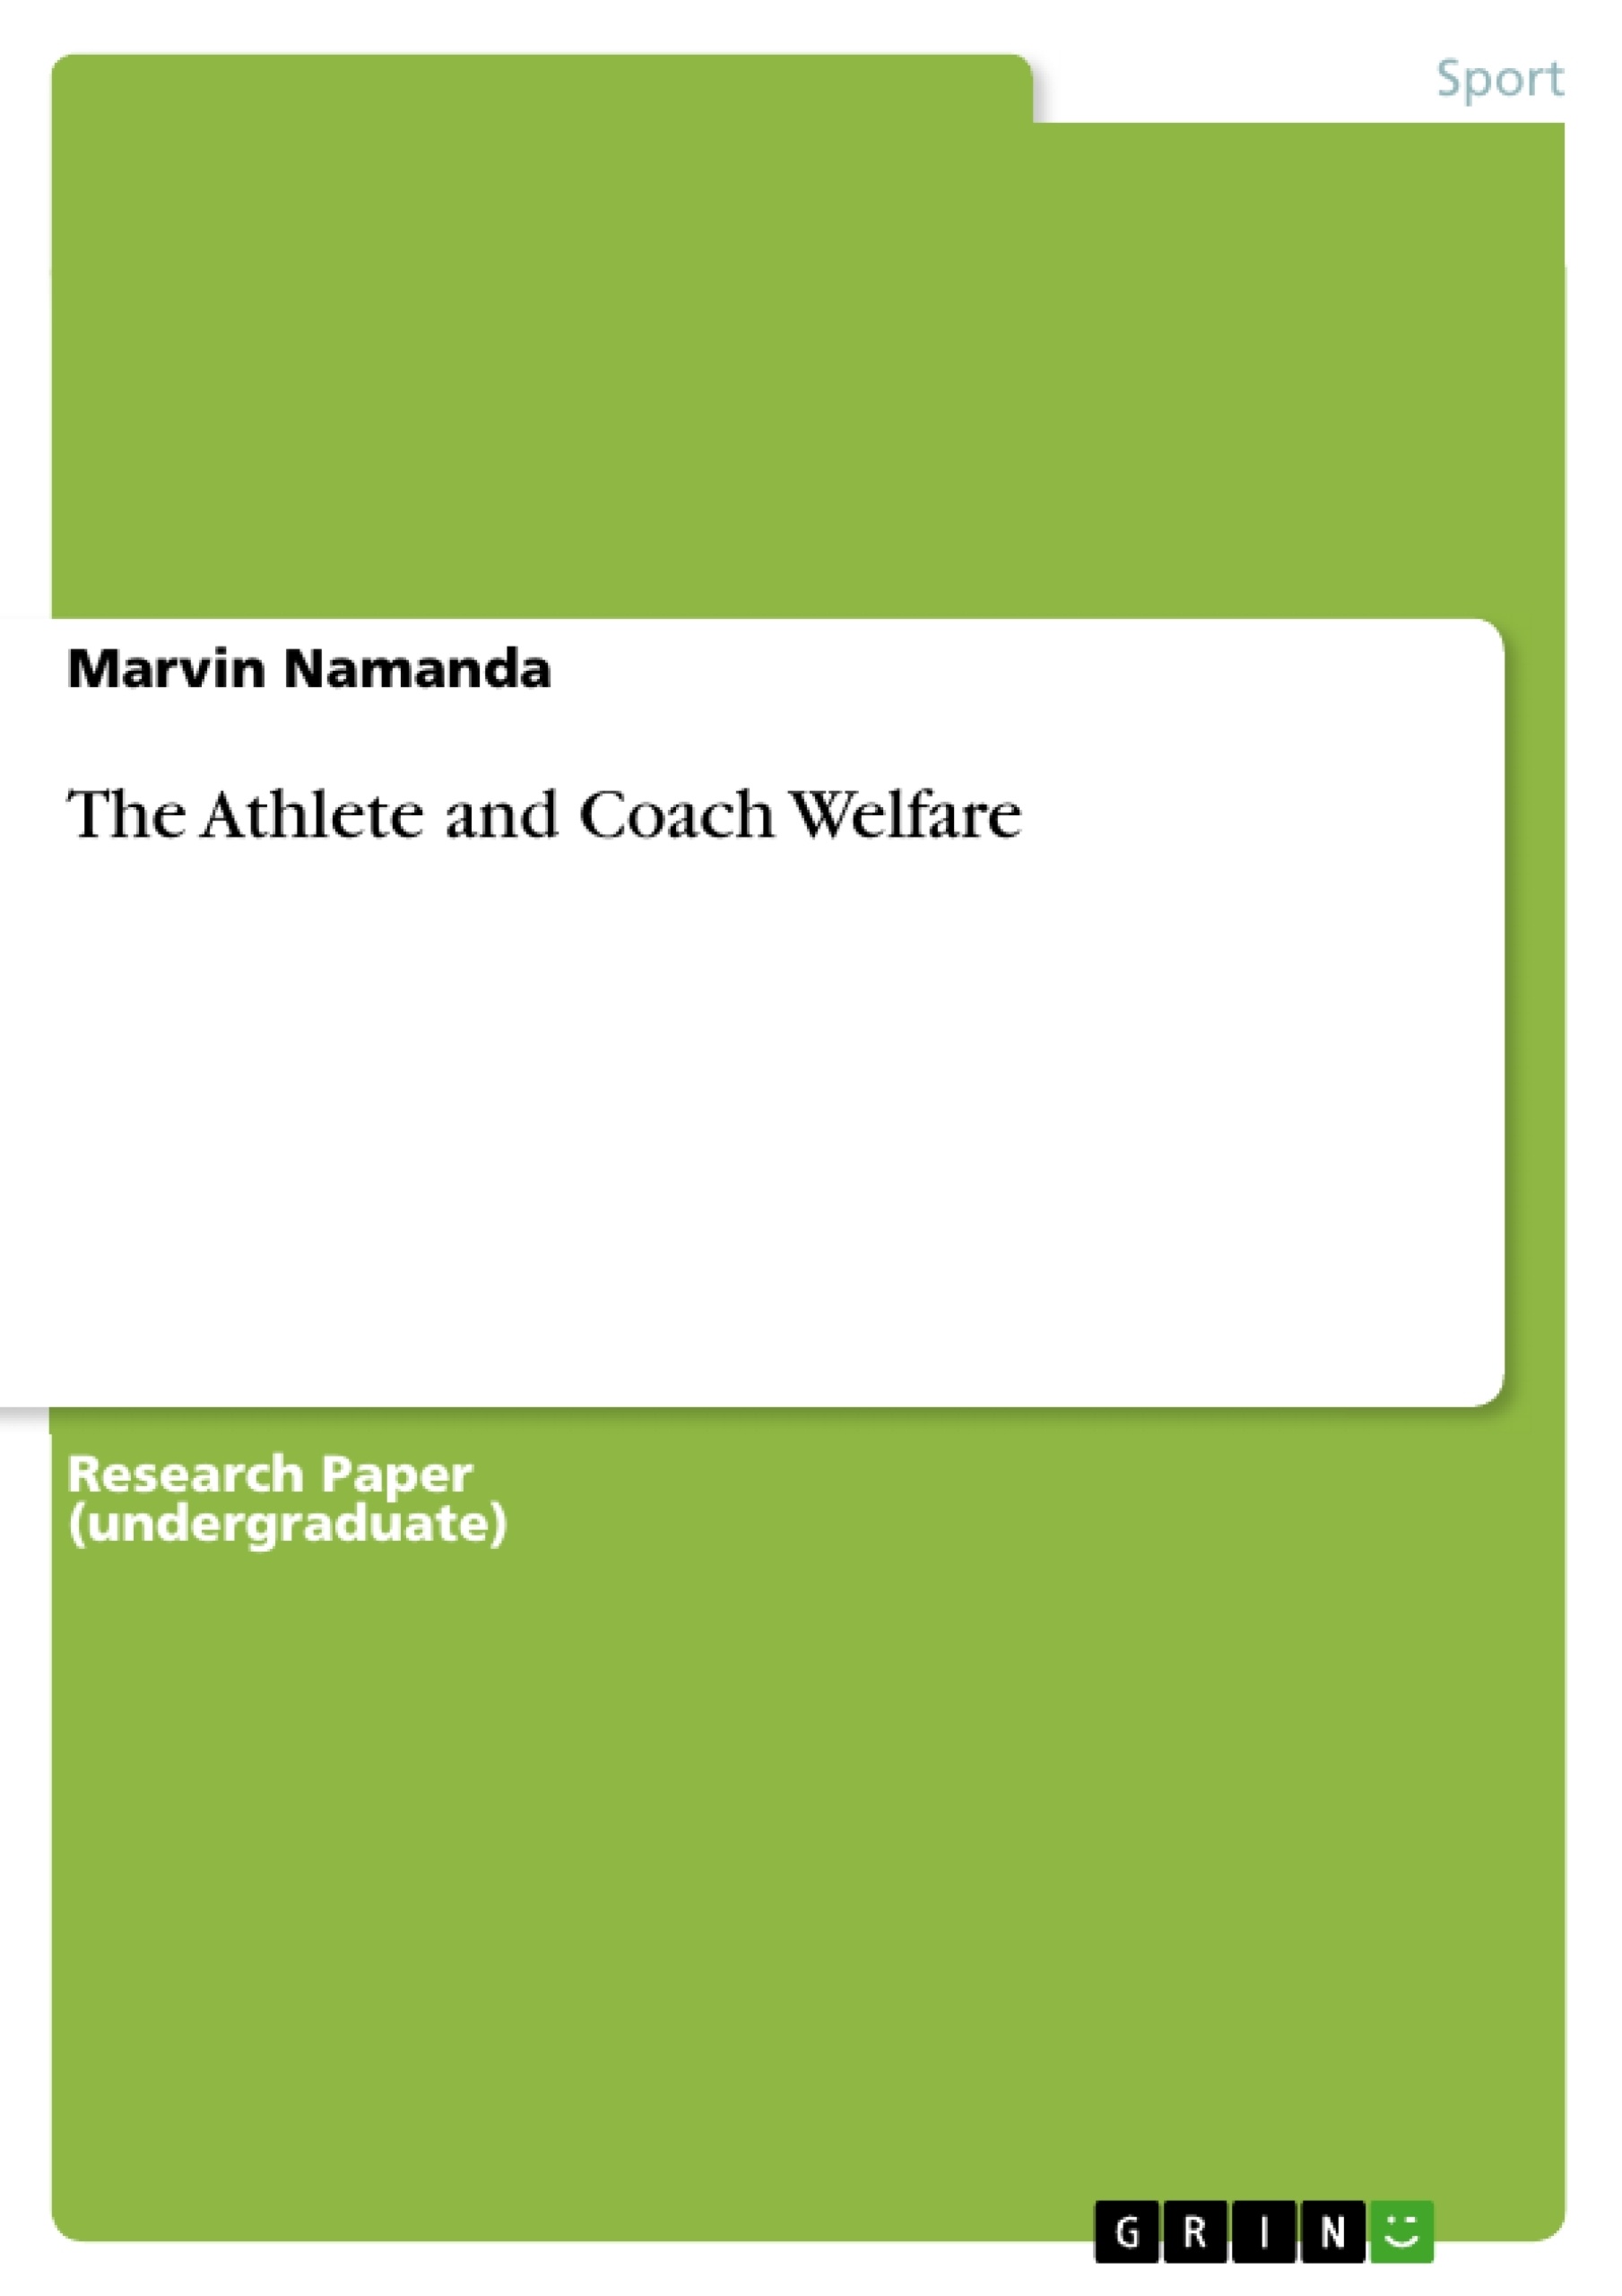 Title: The Athlete and Coach Welfare